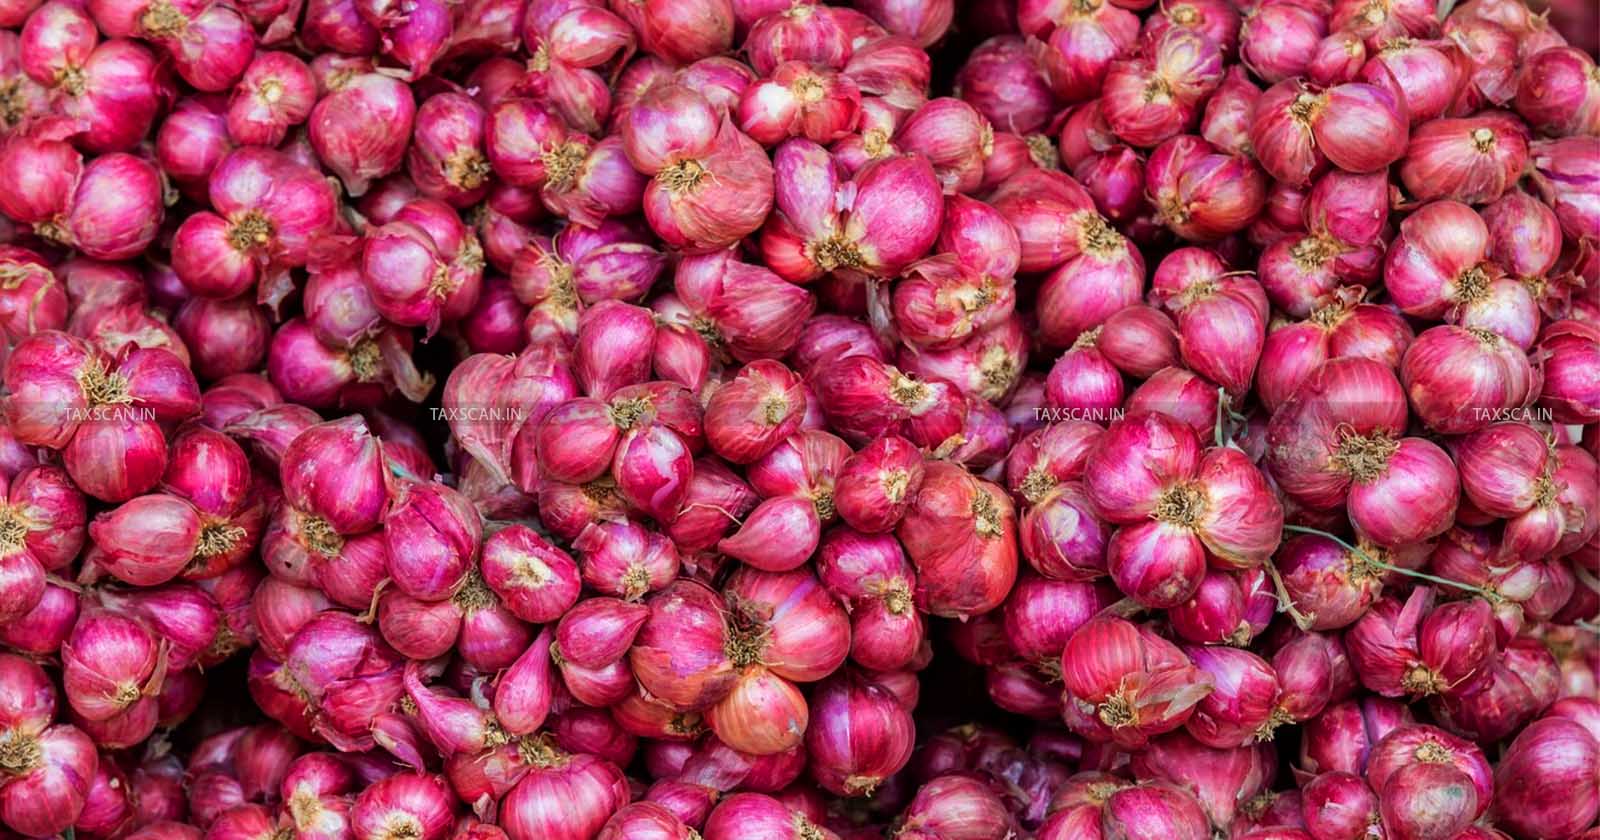 Onion Export Ban - Onion Export Restrictions - Government Restriction On Onion Export - Government Policy On Onion Export - Taxscan